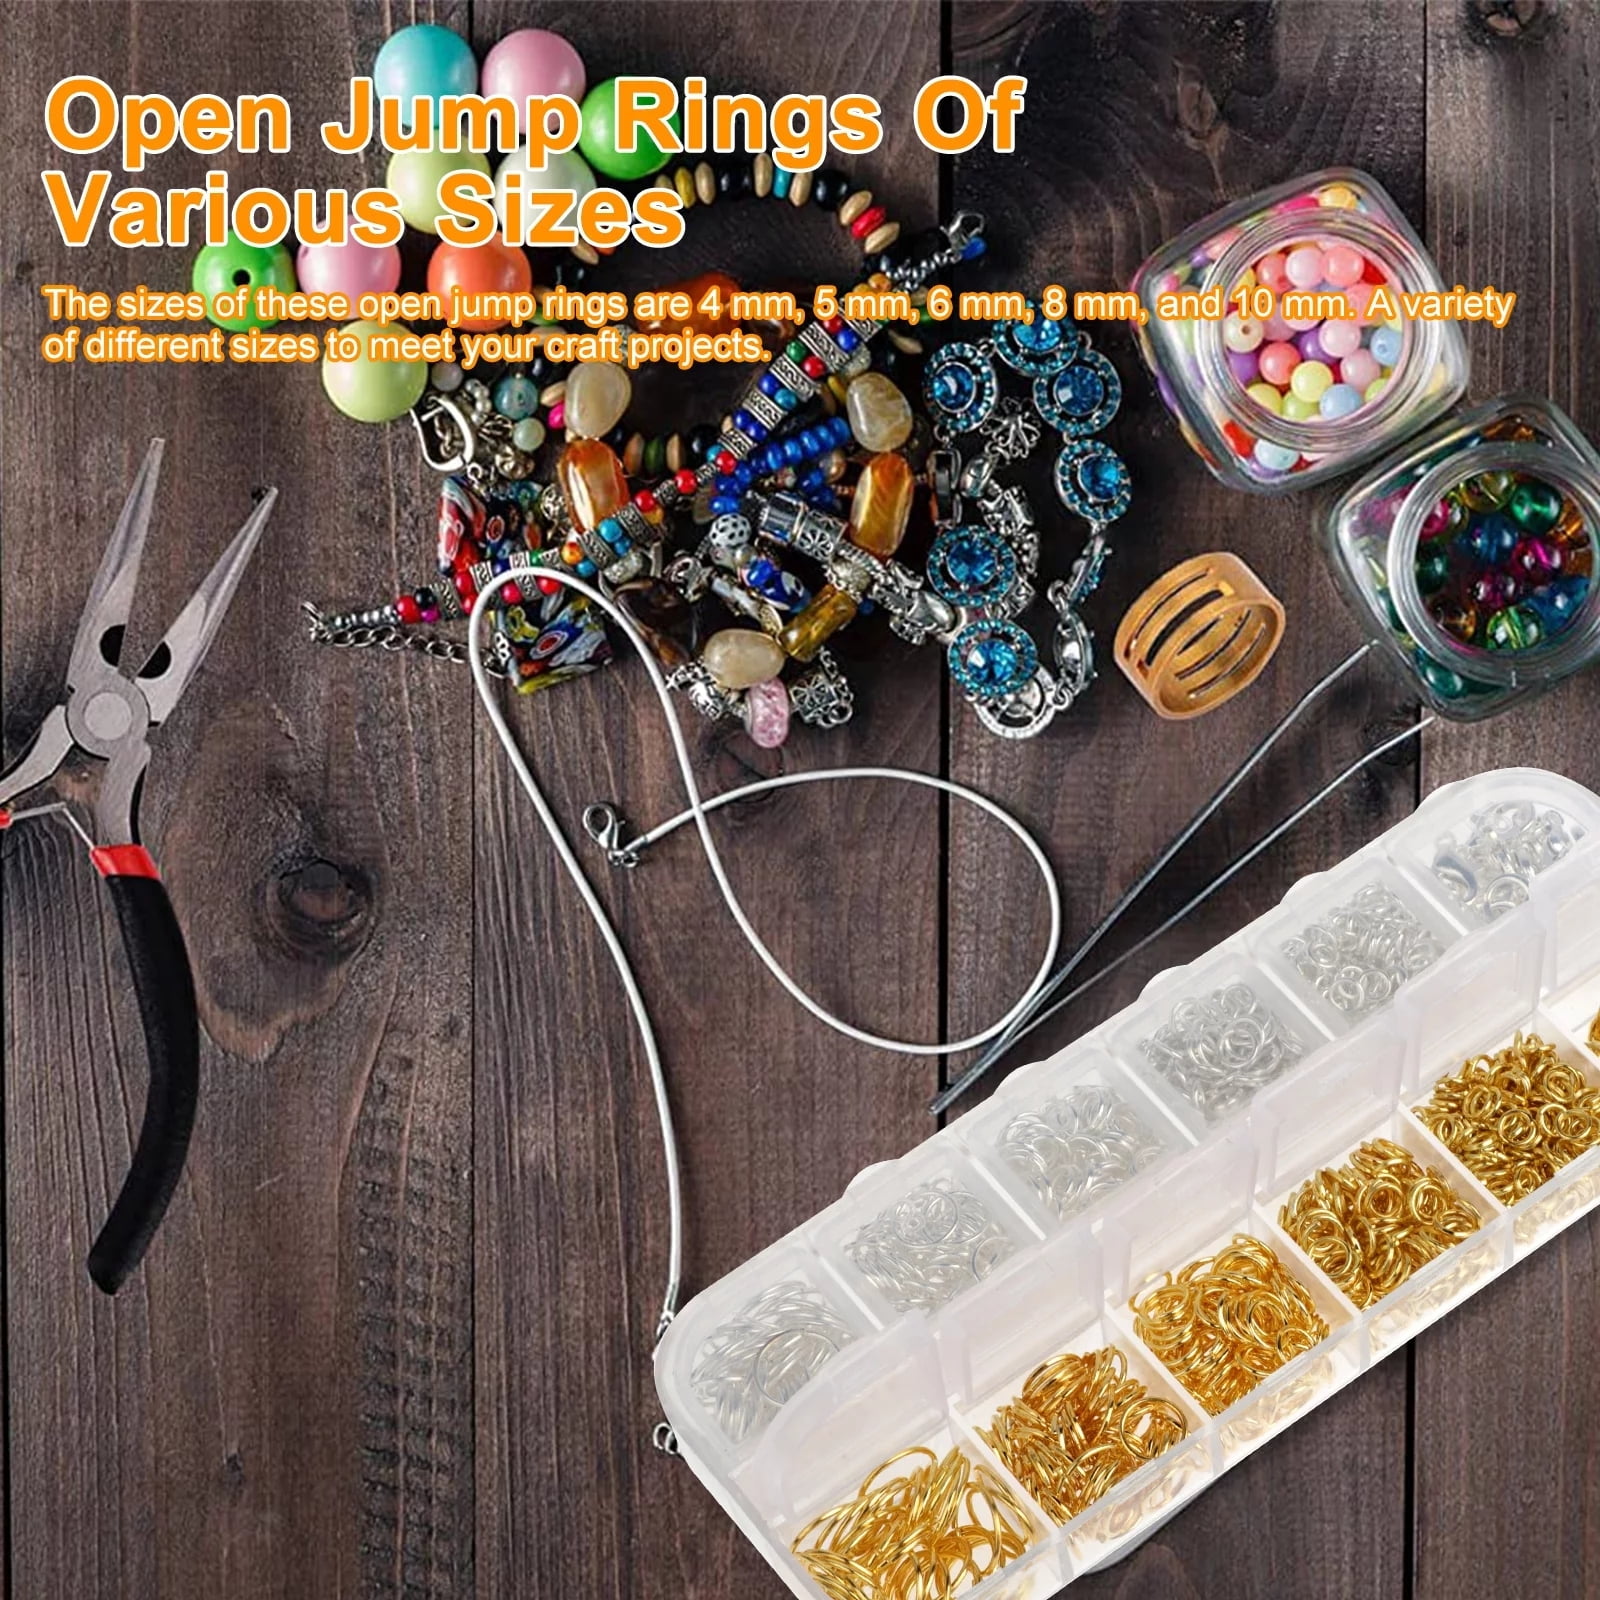 AIDAITOP Jewelry Making Supplies Kit, 1203pcs Jewelry Making Starter Kit Jewelry Findings Kit Repair Tools Craft Supplies DIY, Women's, Size: One size, Gold